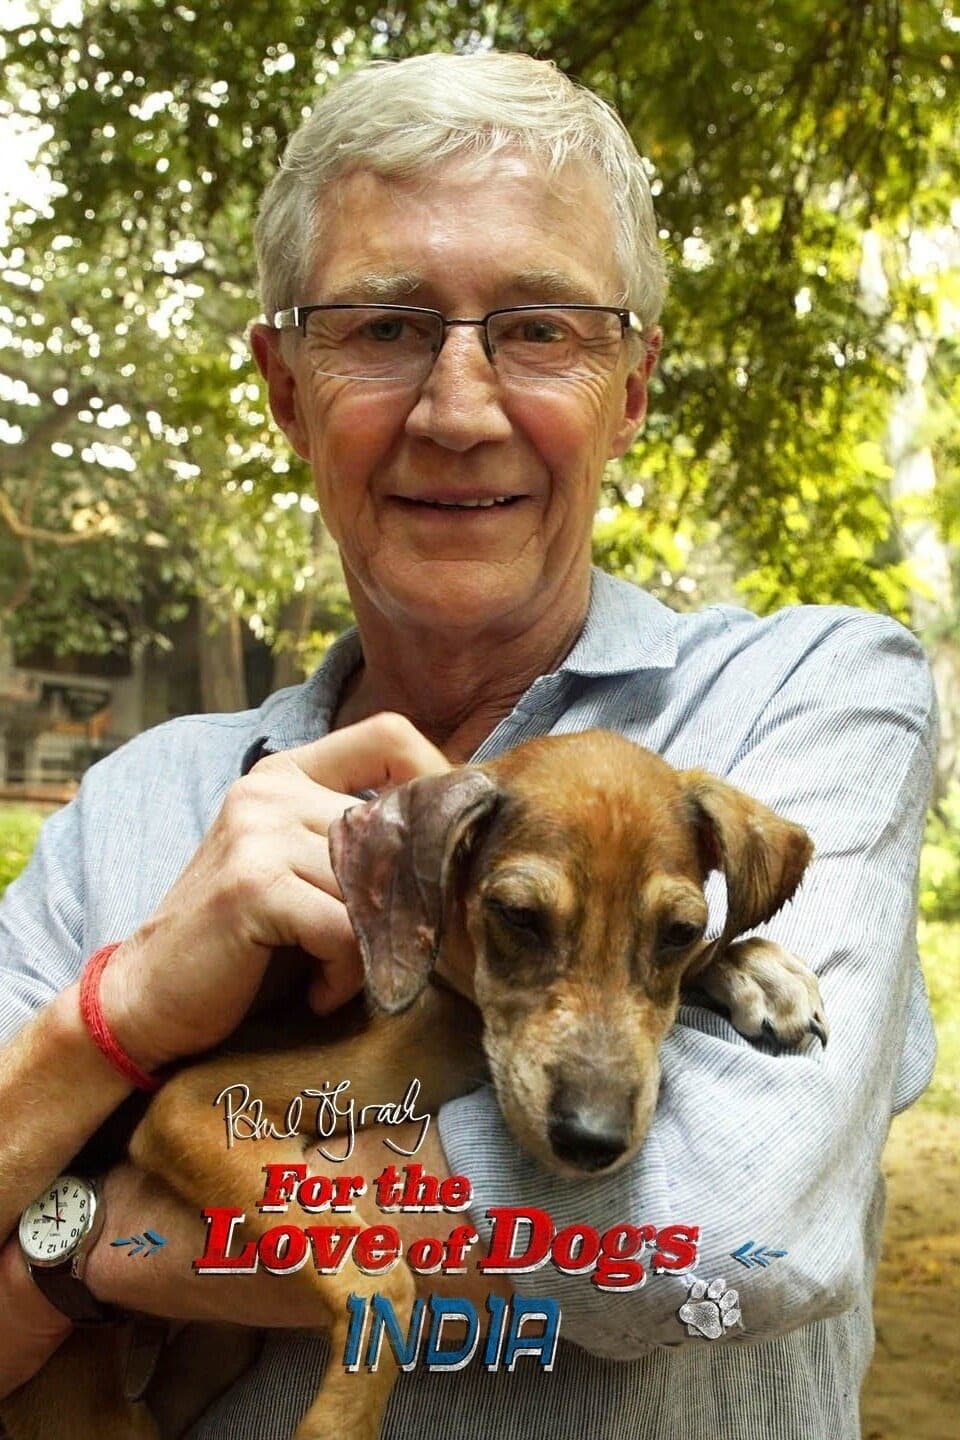 Paul O'Grady For the Love of Dogs - India